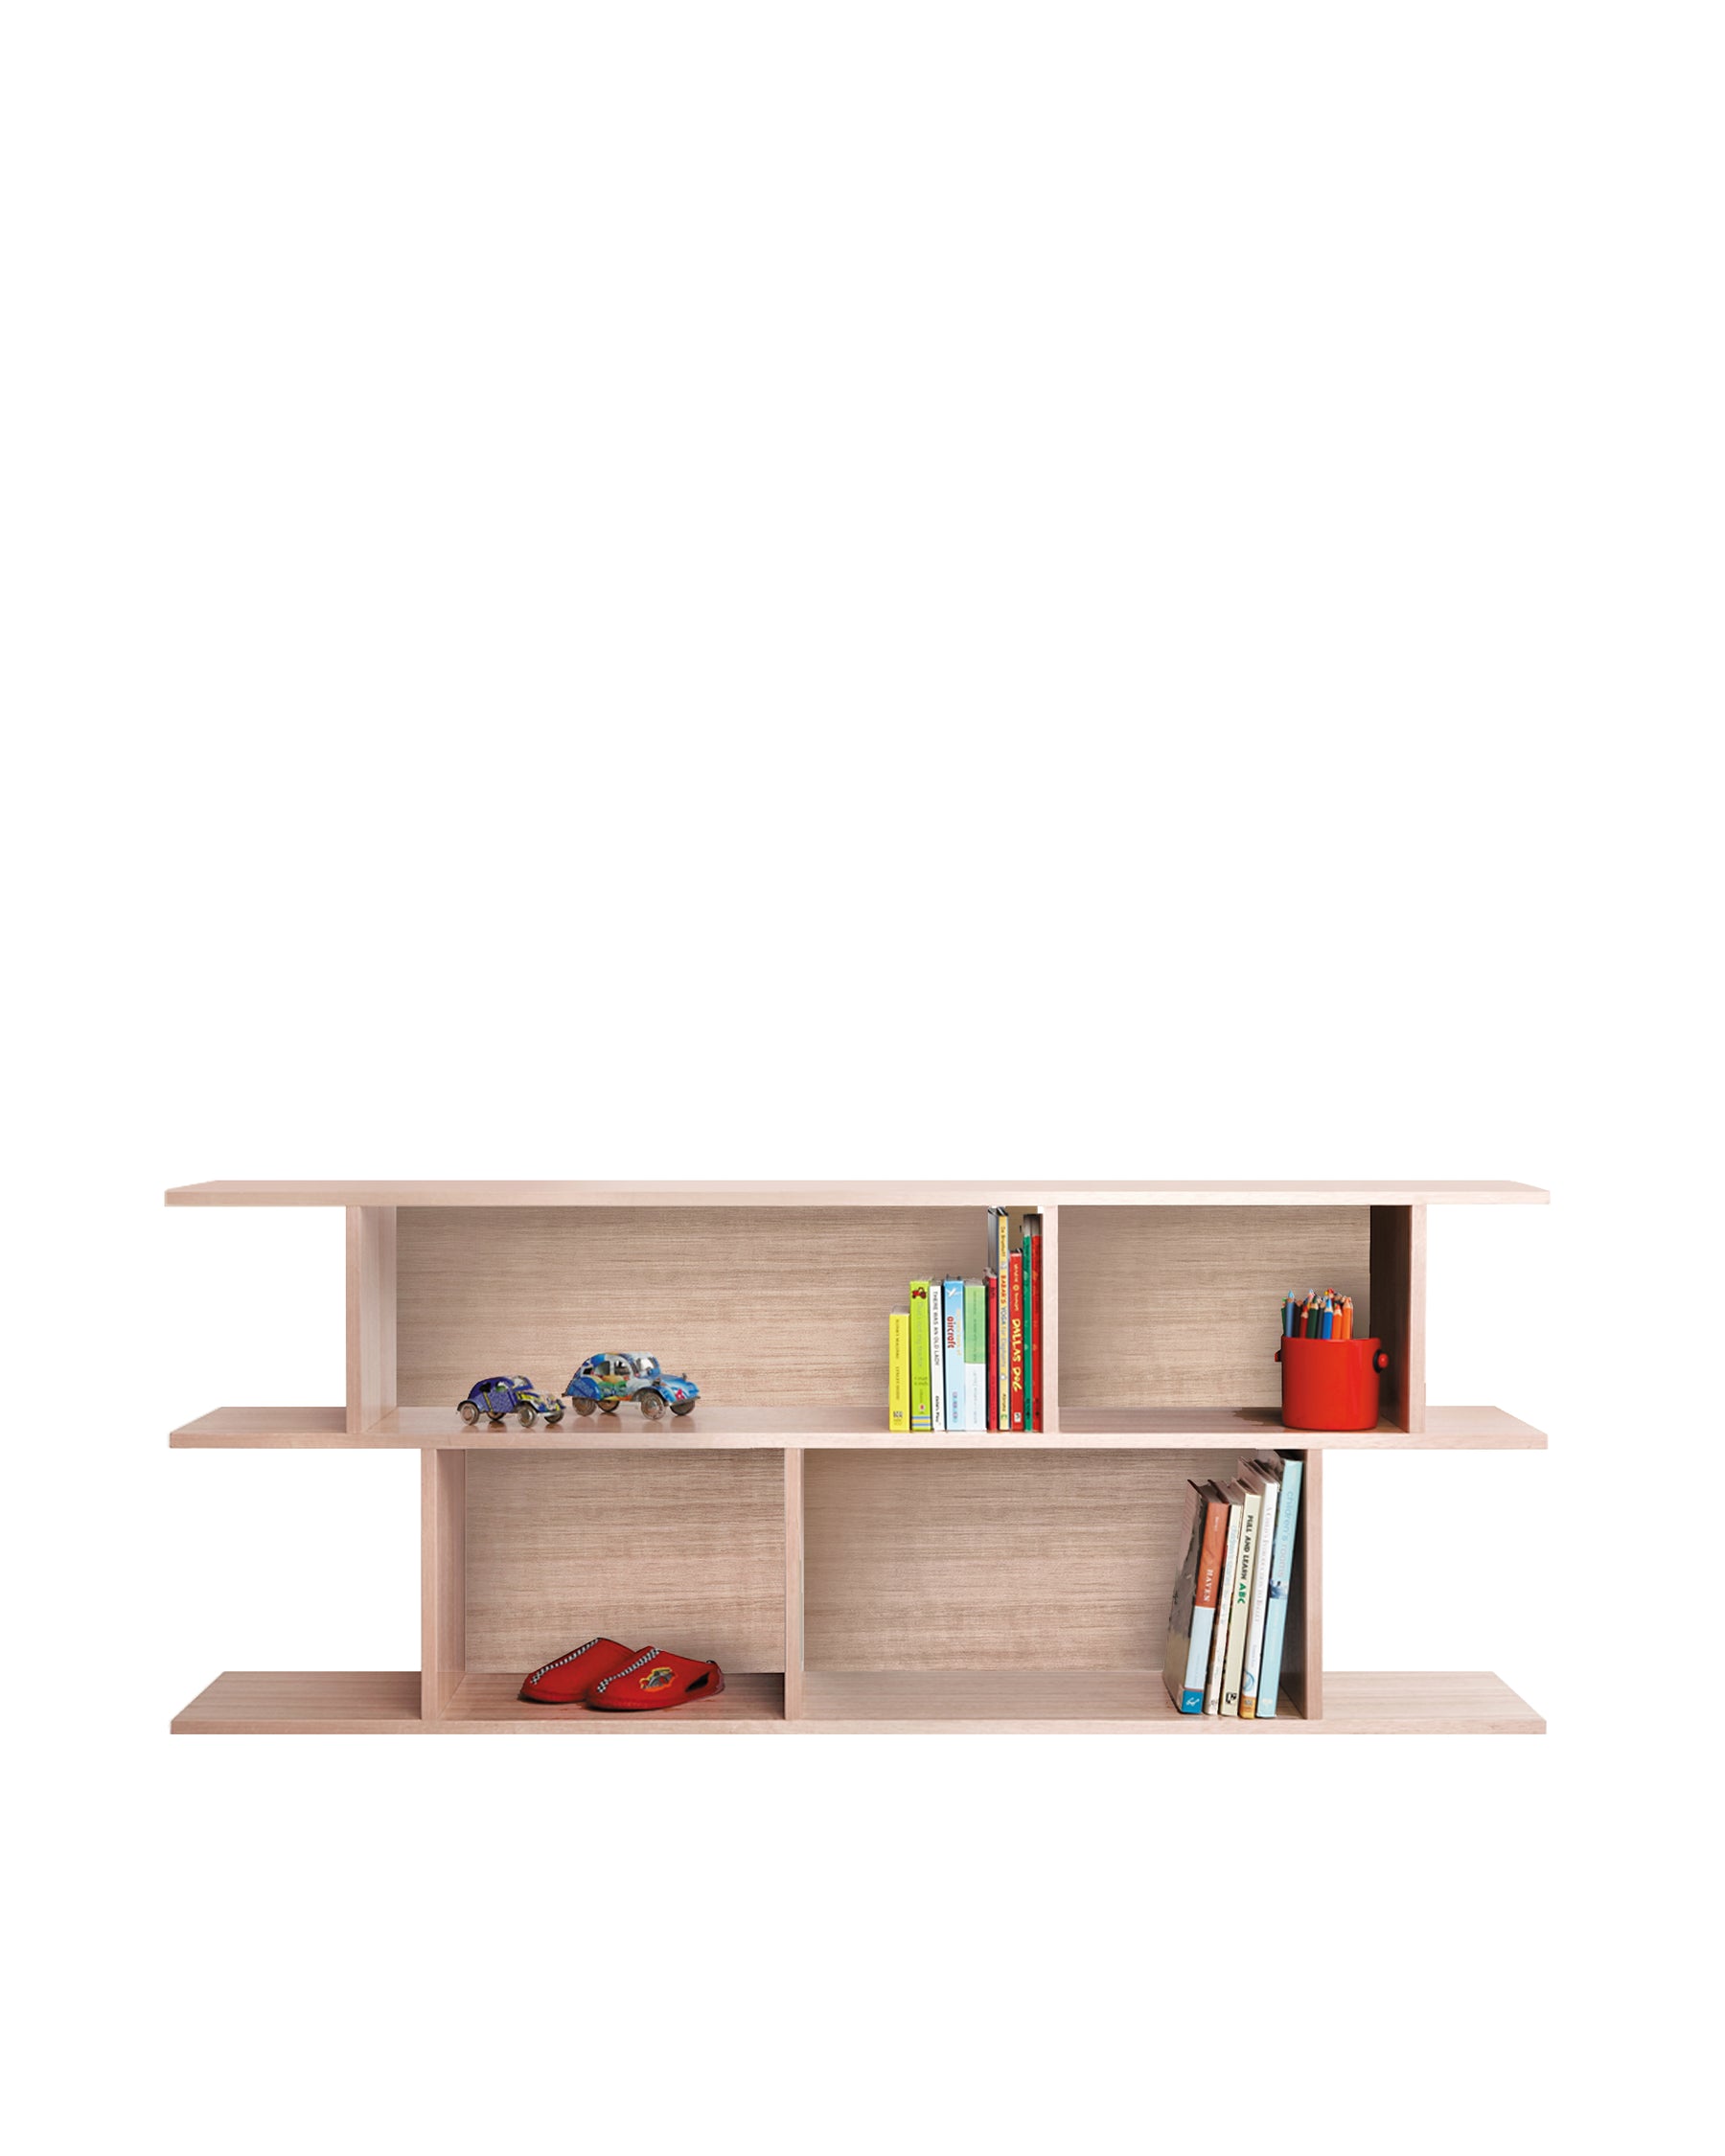 NED WALL MOUNTED BOOKCASE